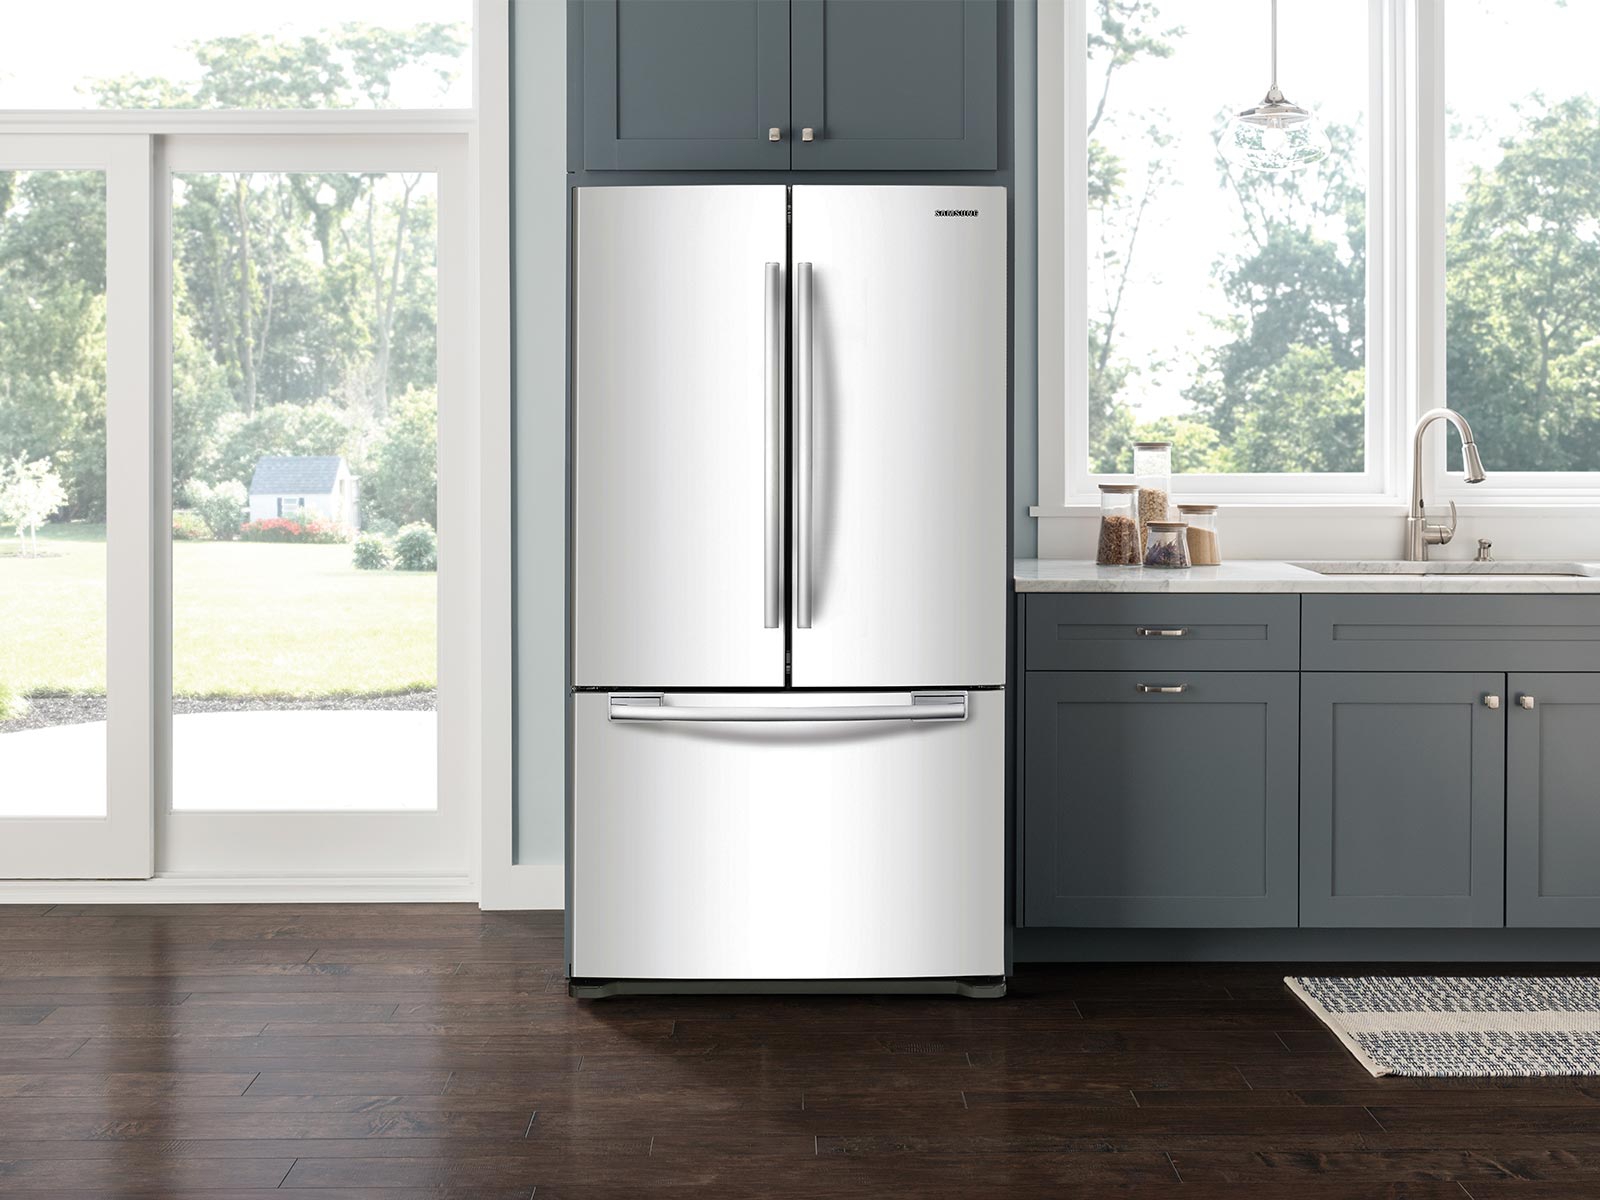 Thumbnail image of 18 cu. ft. Counter Depth French Door Refrigerator in White